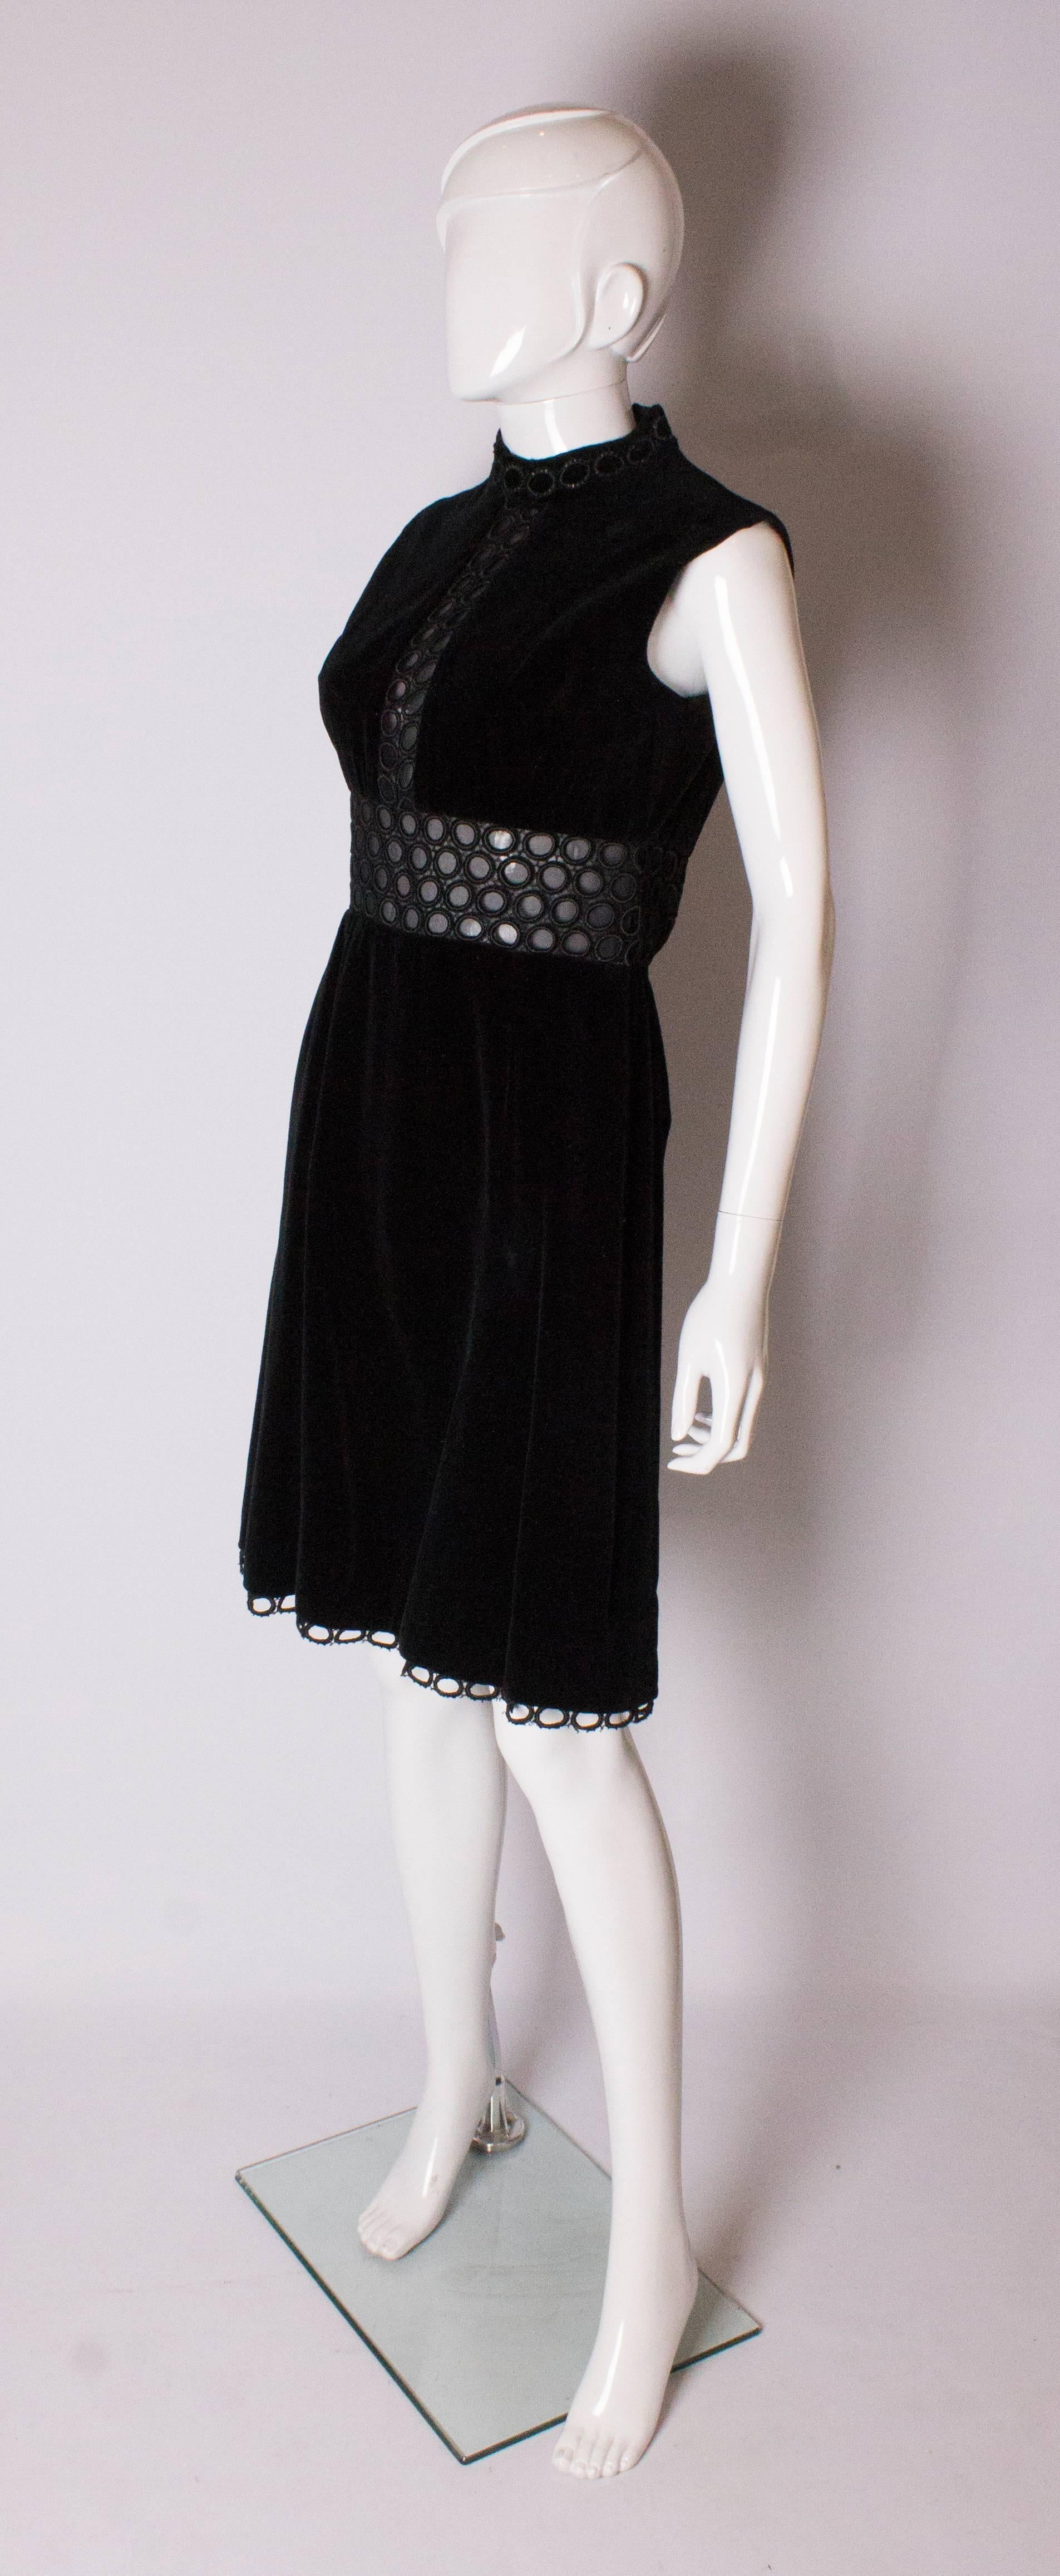 A chic cocktail dress by British designer Susan Small. The dress has a cut out mid panel and braiding around the neck and hem, with a central back zip.